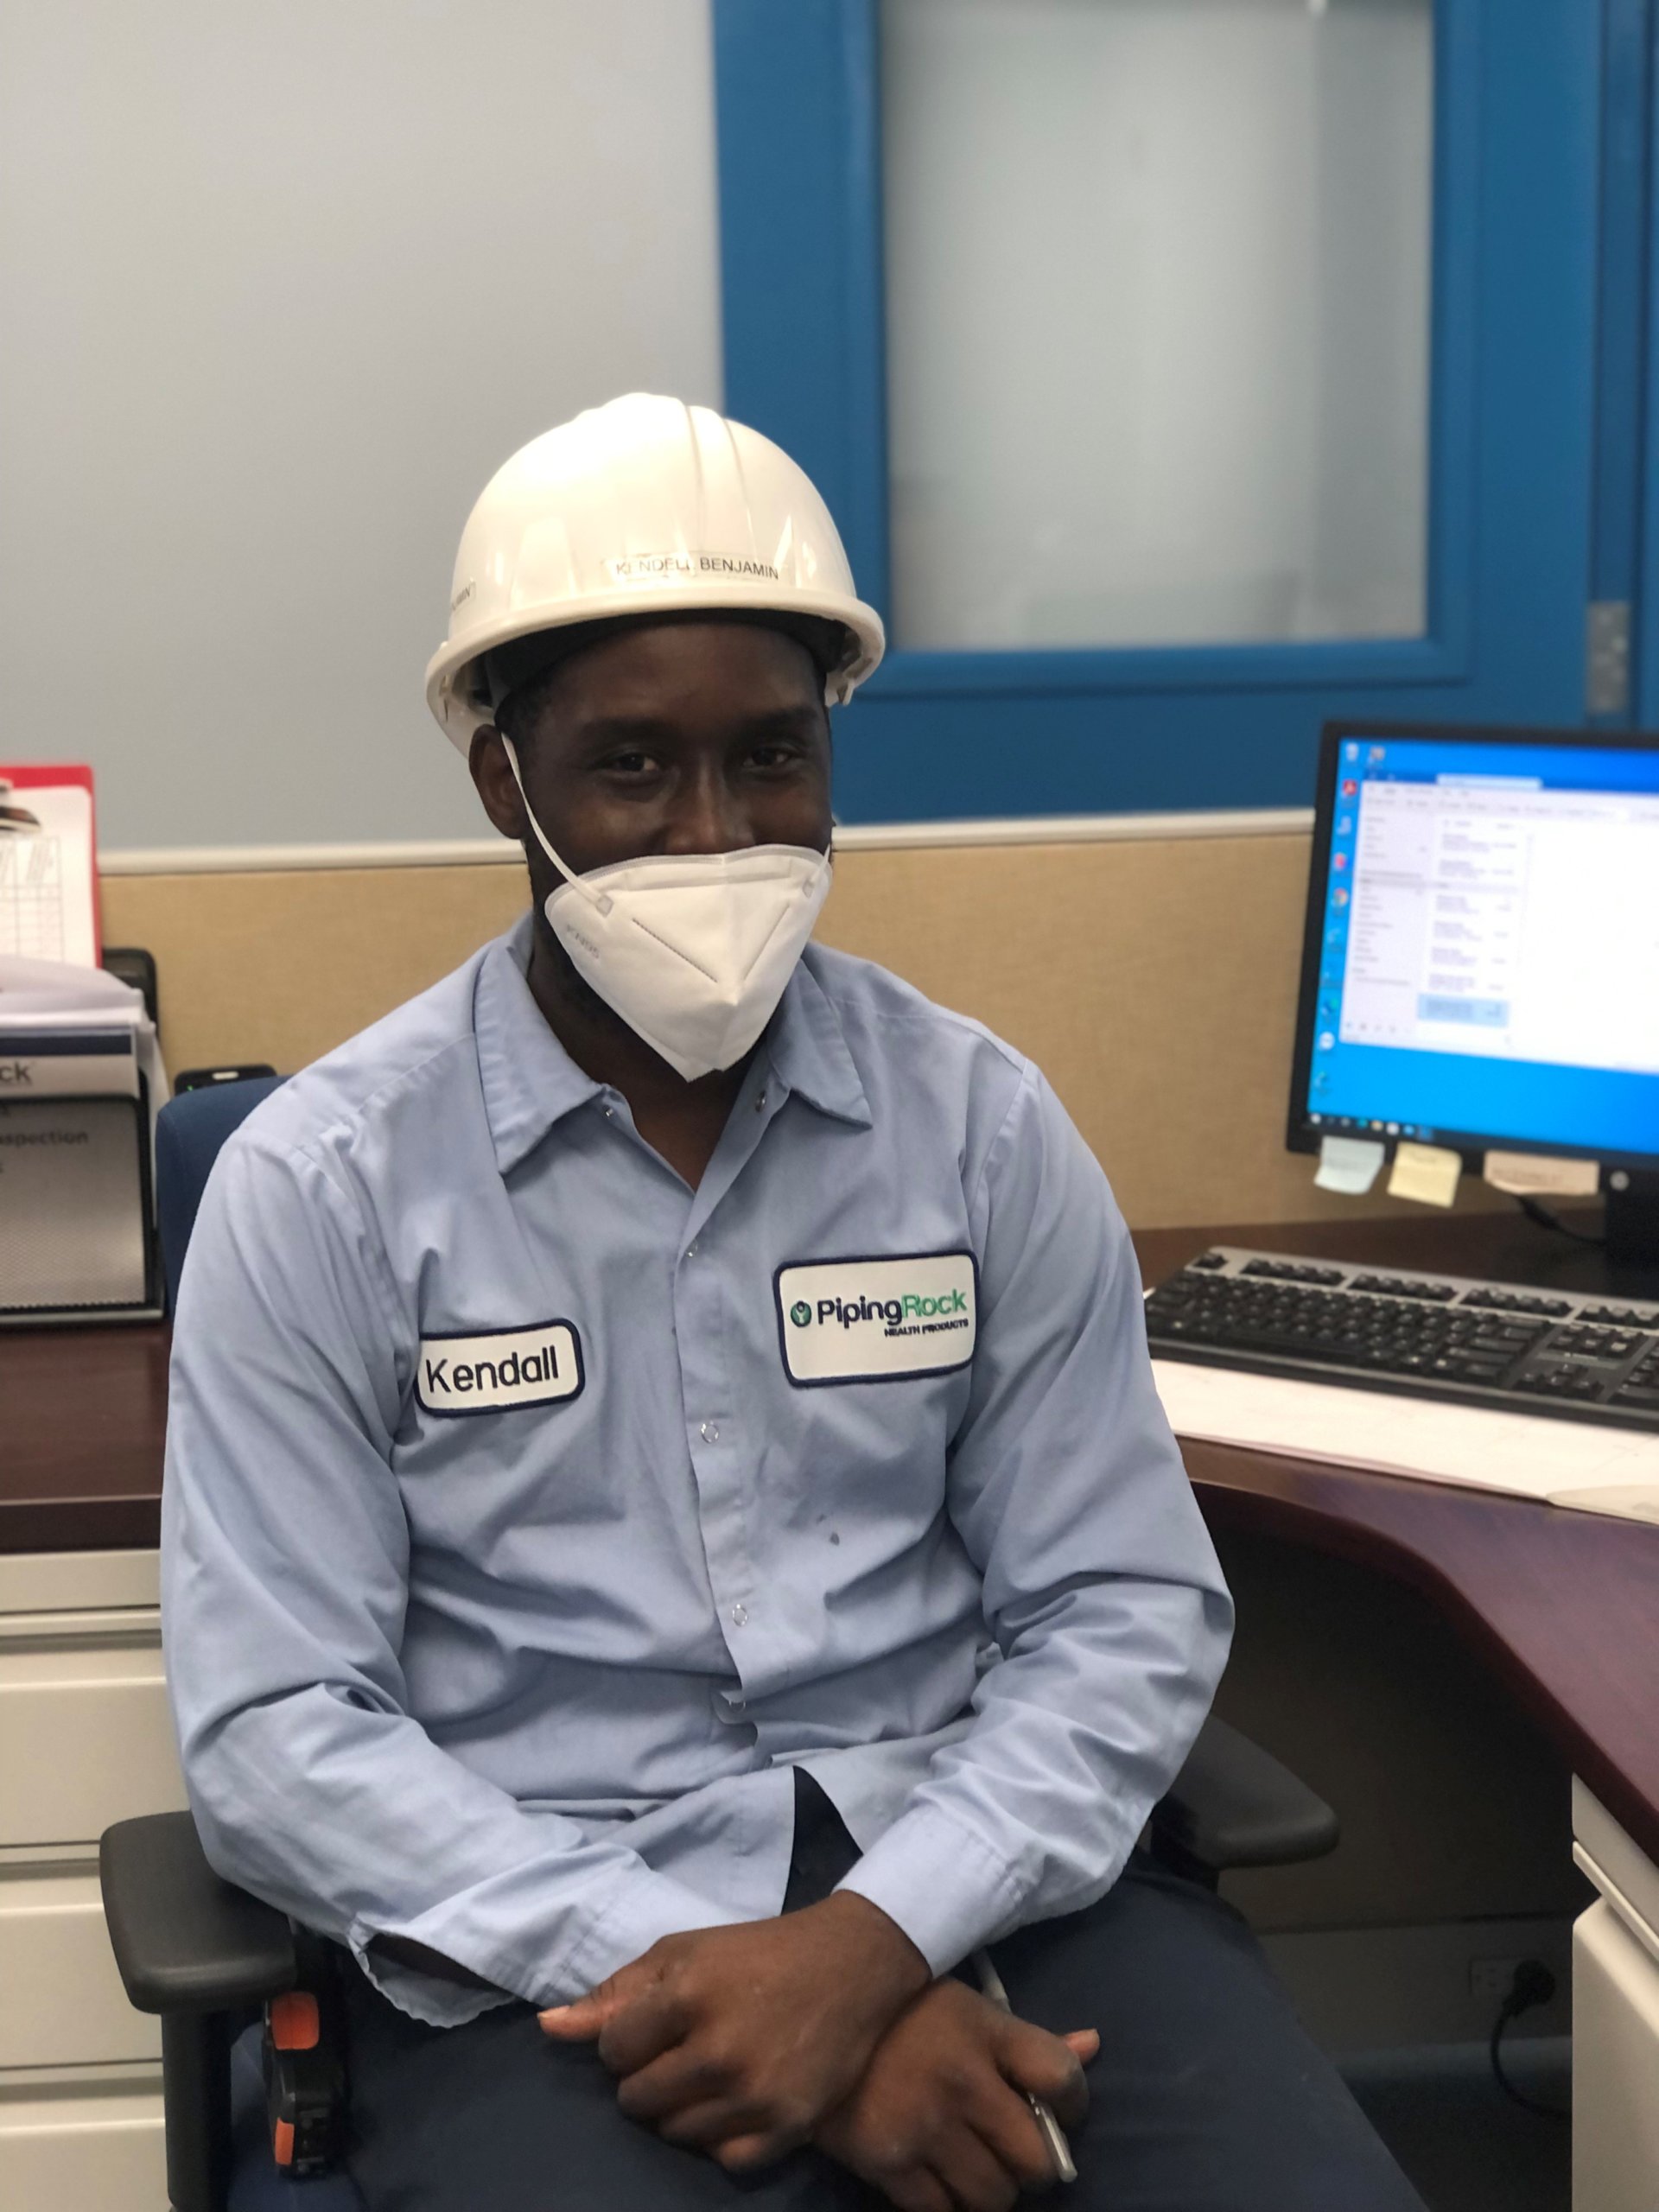 Kendall Benjamin, a Piping Rock associate, enjoys learning new skills and completing a variety of tasks at the company.